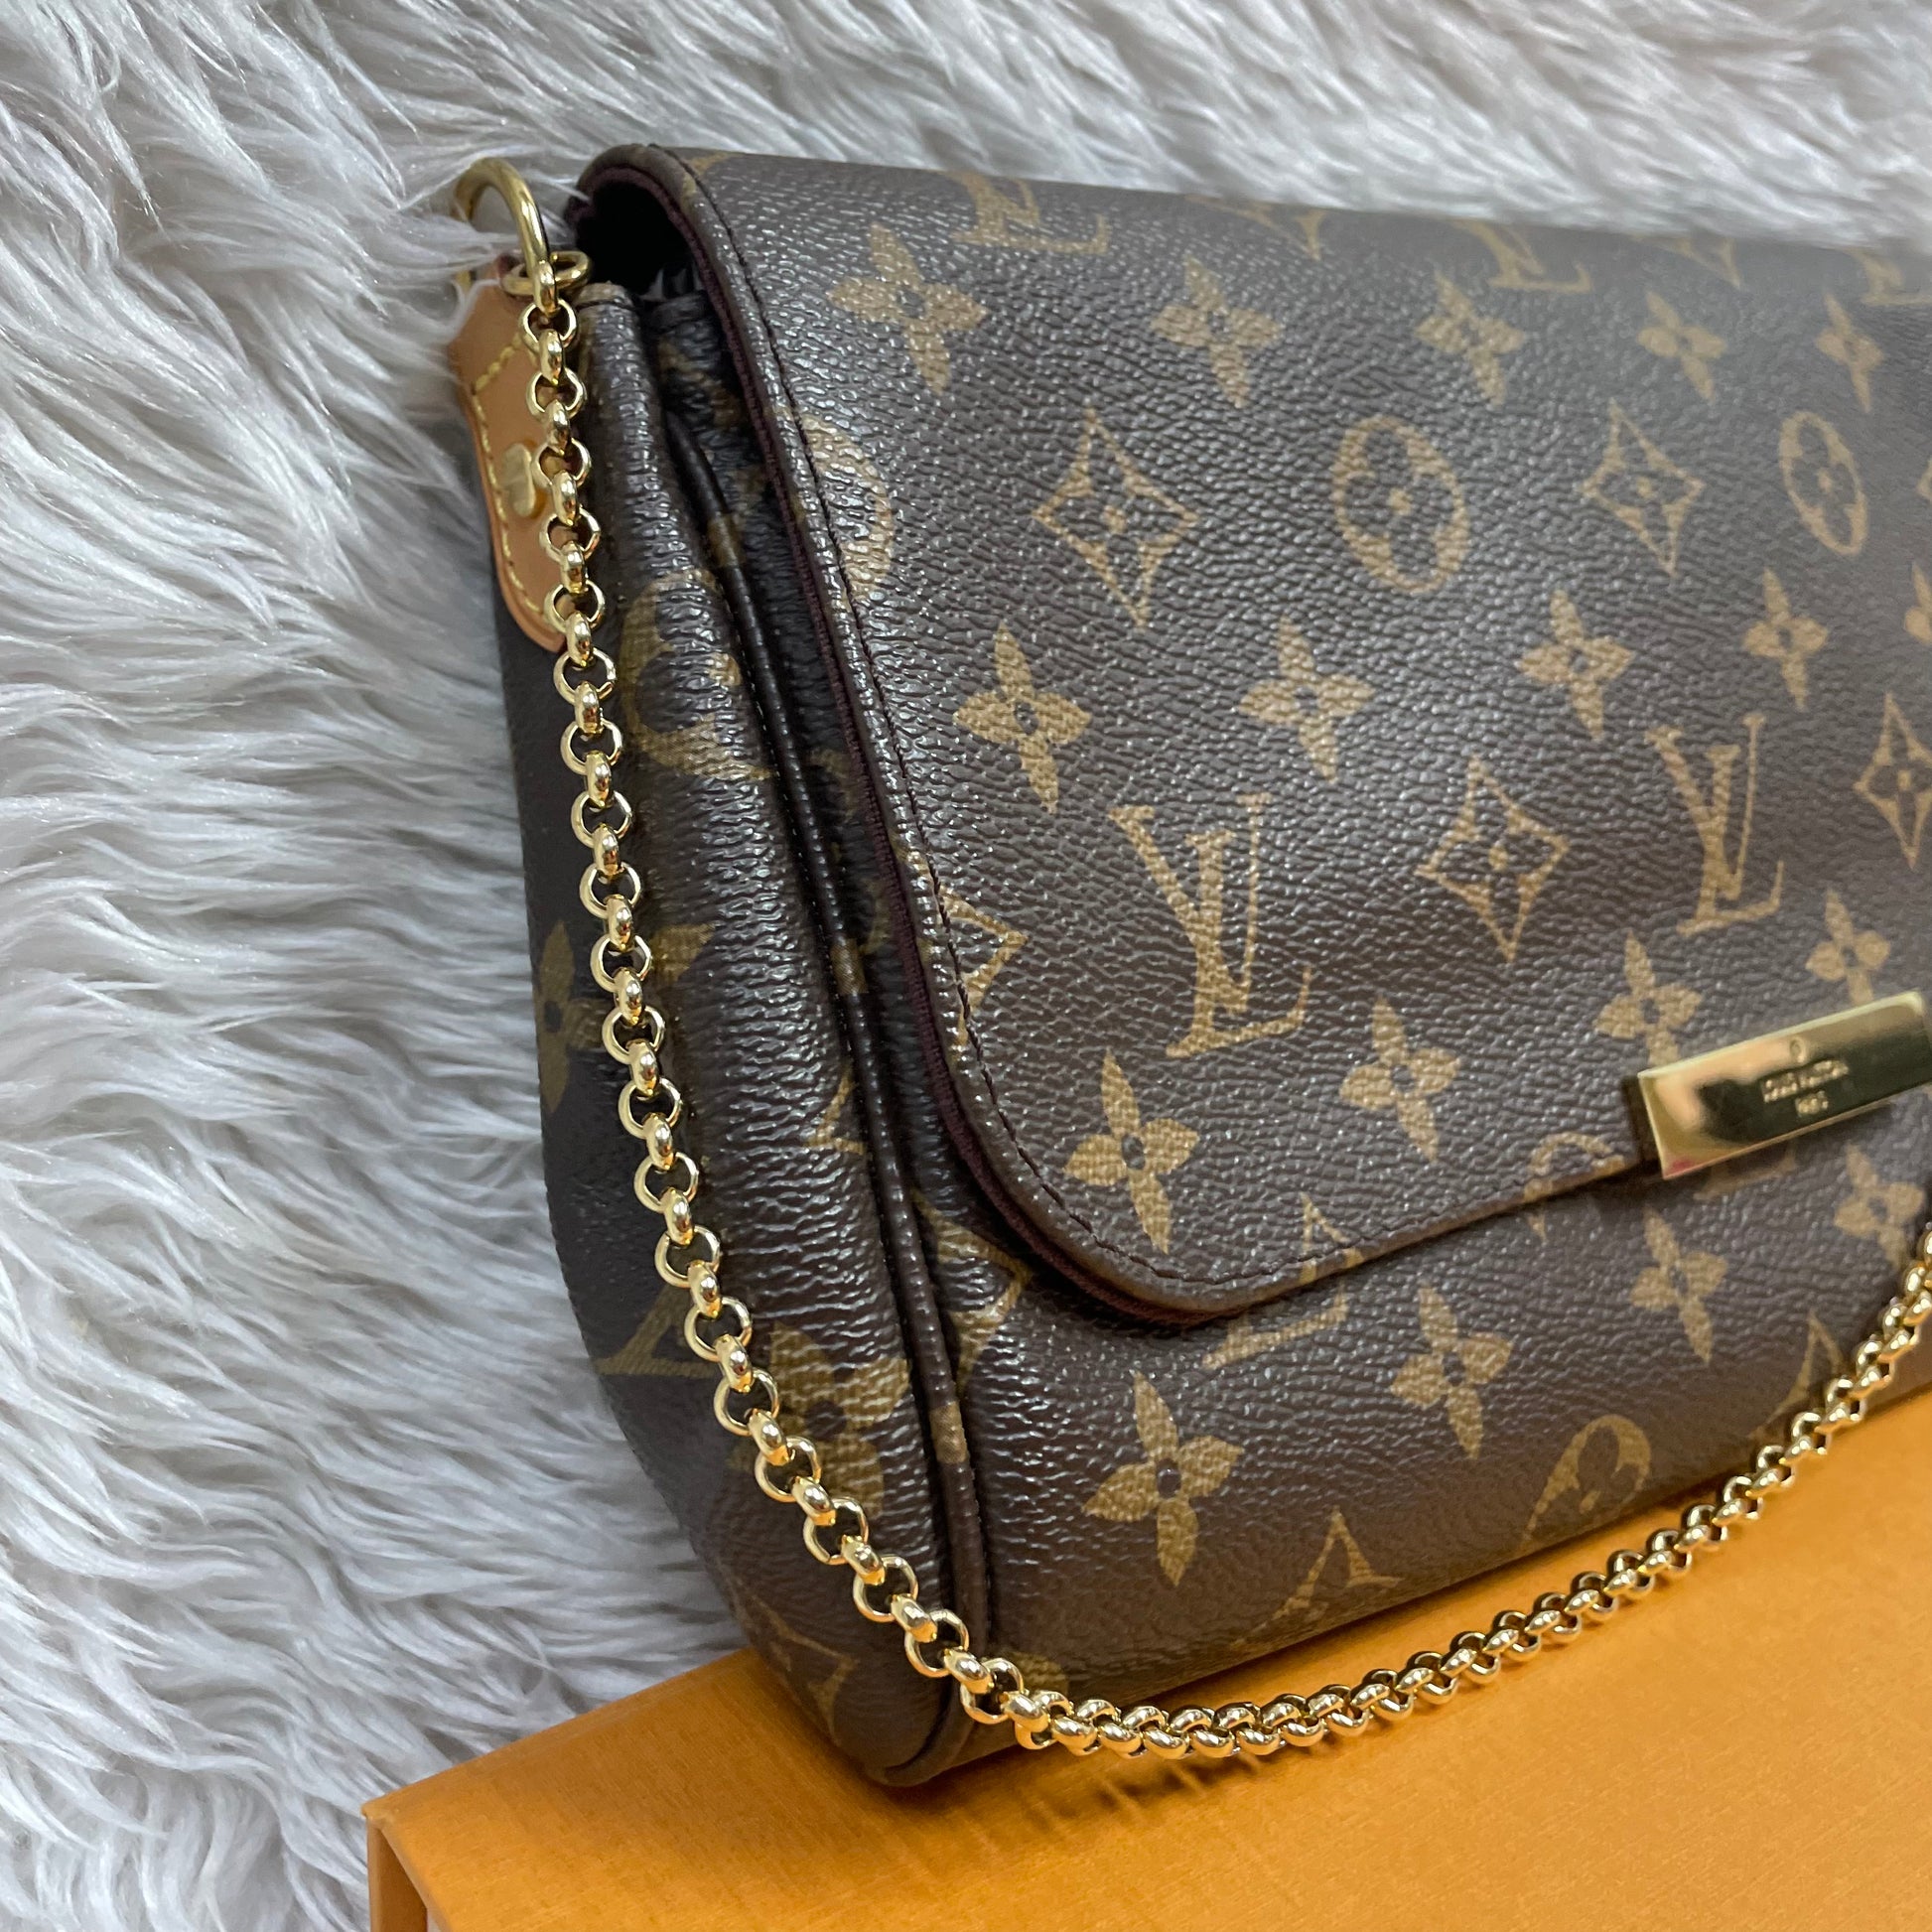 How To Spot Authentic Louis Vuitton Favorite MM Bag and Where To Find the  Date Code 